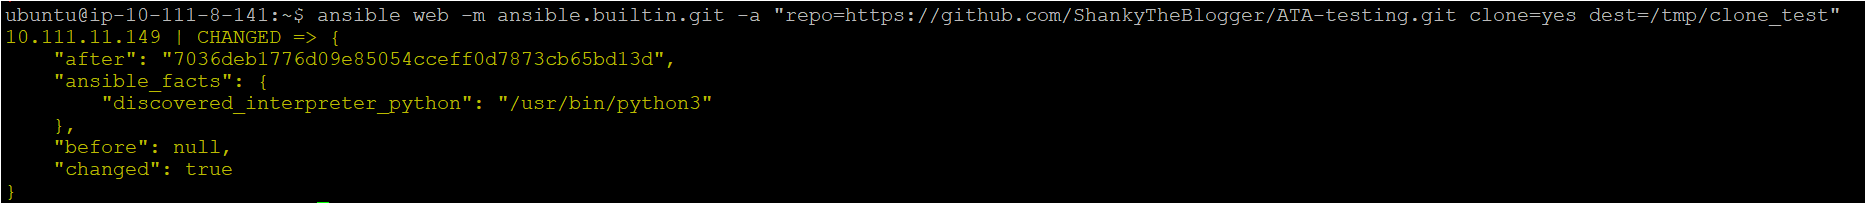 Cloning the Git repository on the remote host inside the tmp directory folder.